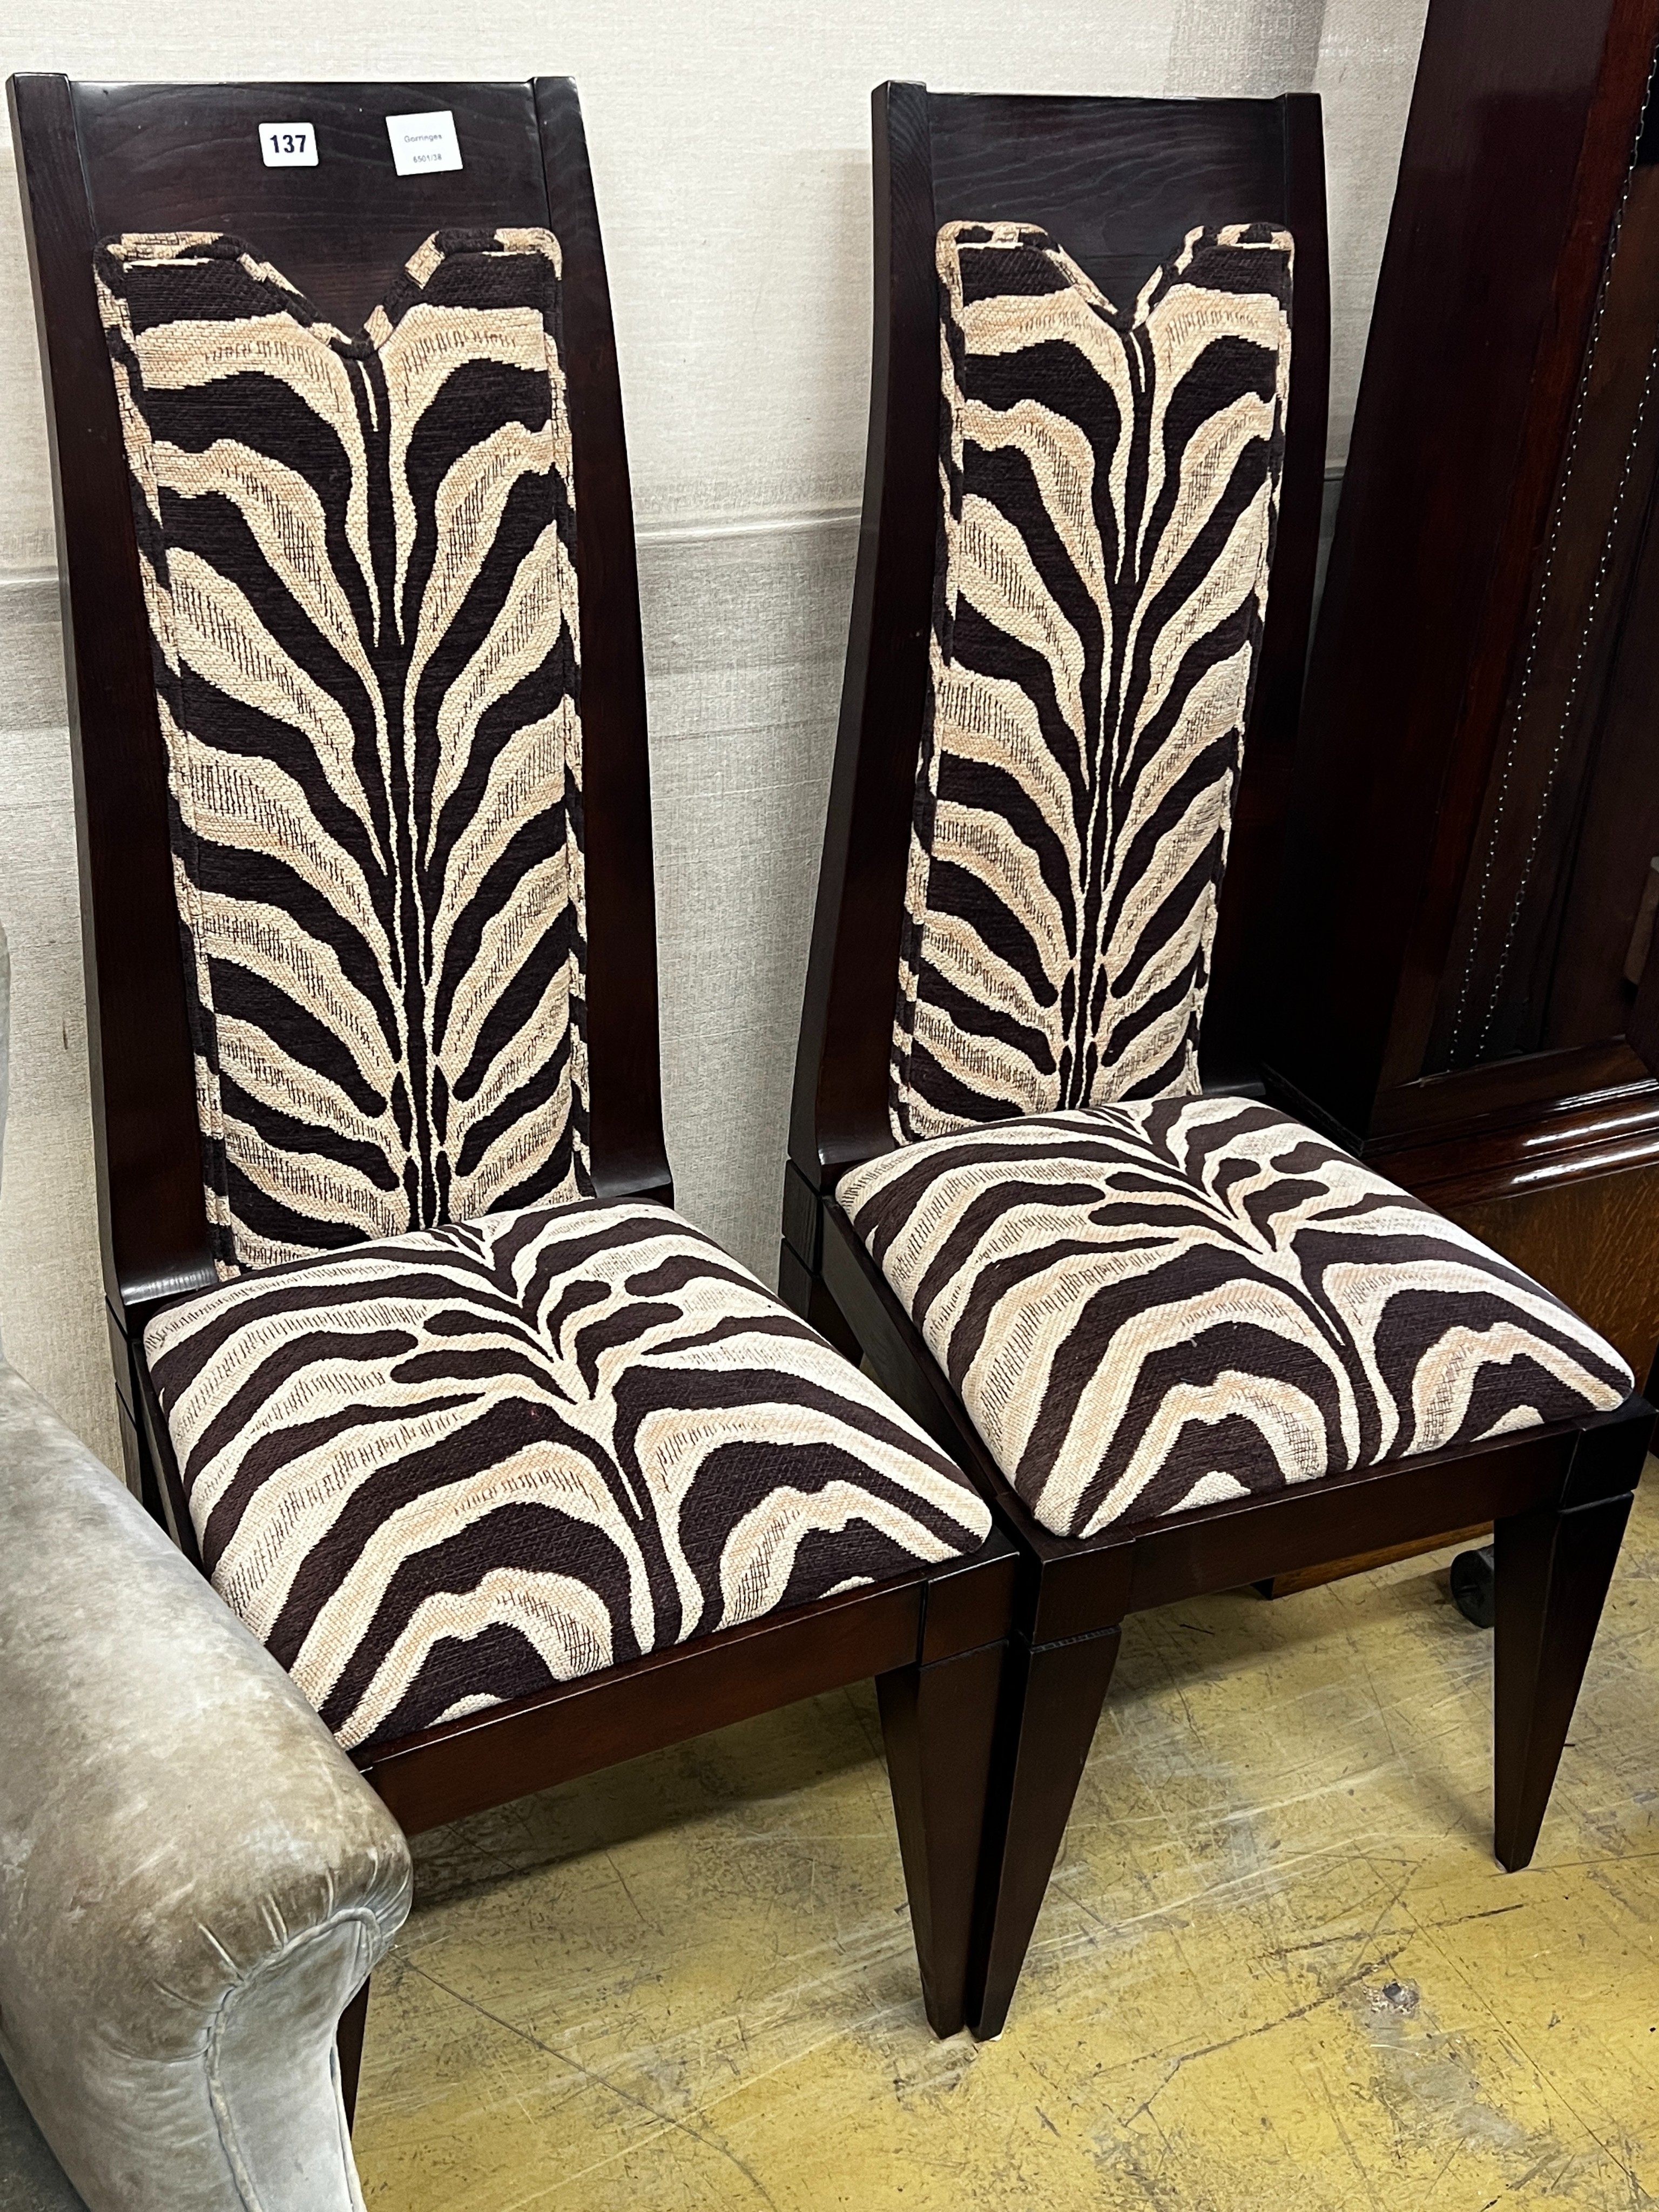 A pair of contemporary Mariner of Valencia zebra print fabric upolsterey side chairs                                                                                                                                        